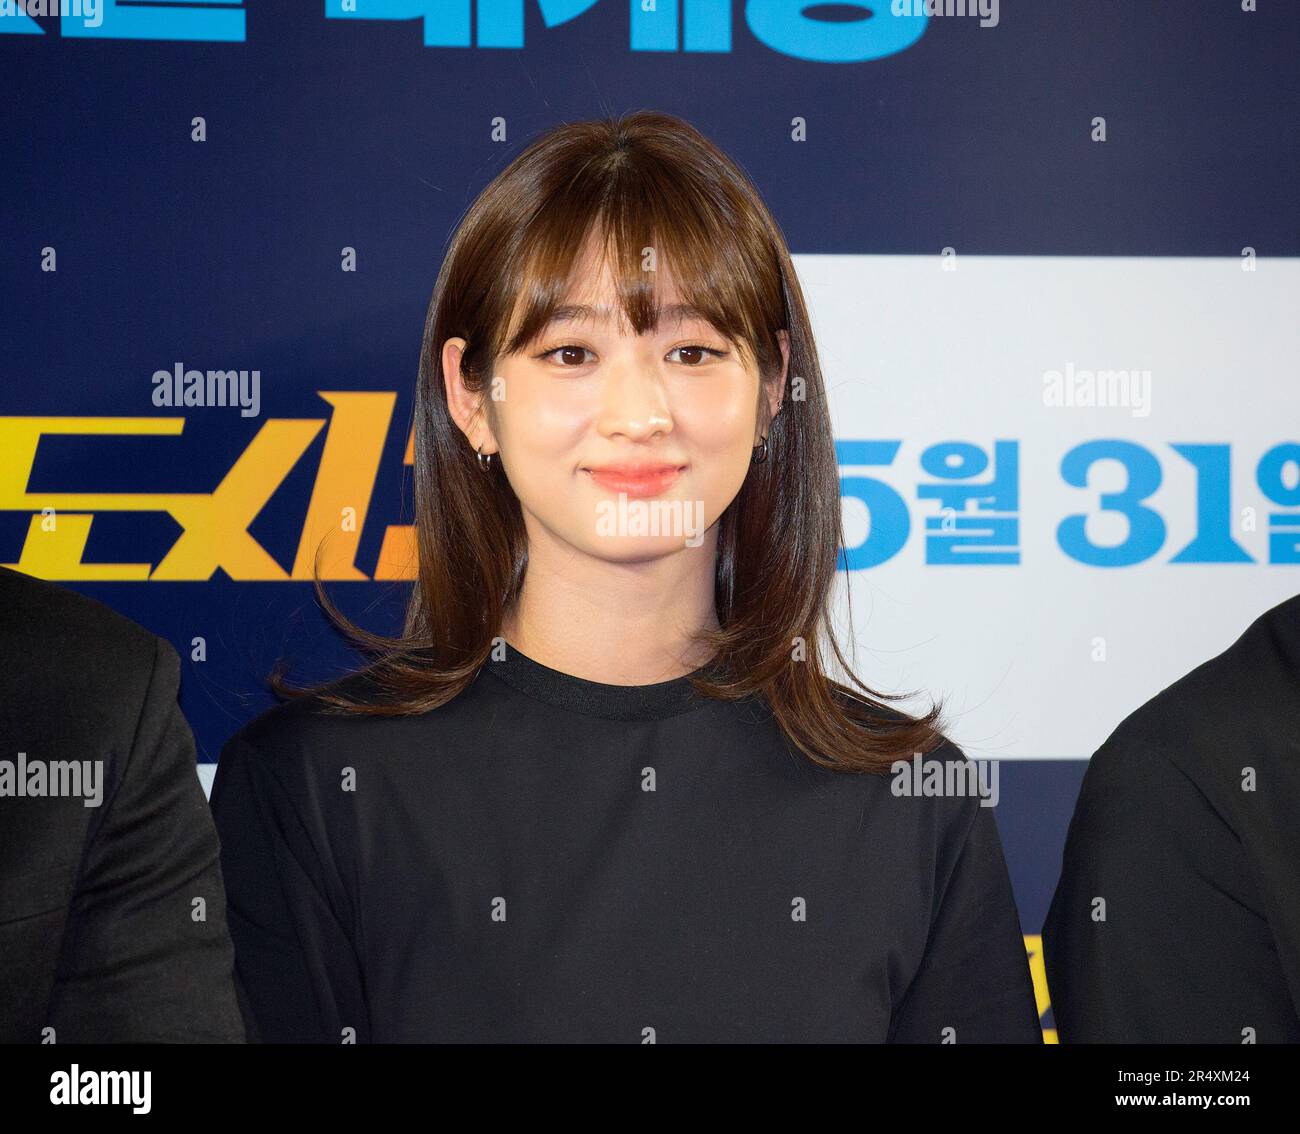 Bae Noo-Ri, May 22, 2023 : South Korean actress Bae Noo-Ri attends a photocall before a VIP preview of South Korean movie 'The Roundup: No Way Out' in Seoul, South Korea. 'The Roundup: No Way Out', the third installment of 'The Outlaws' series will hit local theaters on May 31. Credit: Lee Jae-Won/AFLO/Alamy Live News Stock Photo